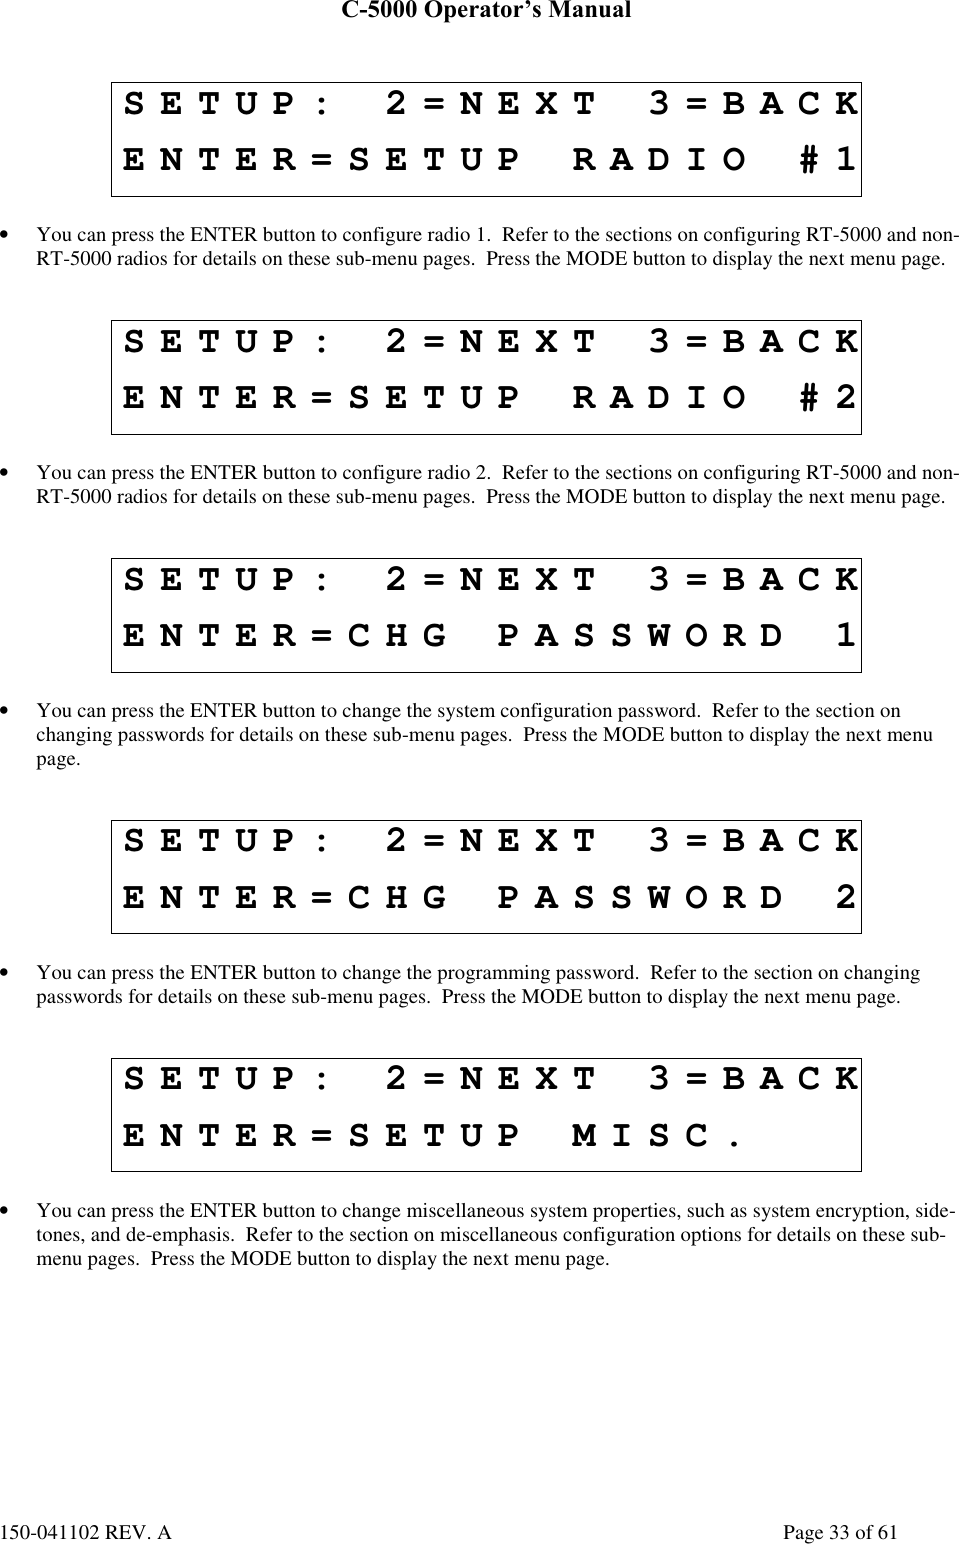 C-5000 Operator’s Manual150-041102 REV. A Page 33 of 61SETUP: 2=NEXT 3=BACKENTER=SETUP RADIO #1• You can press the ENTER button to configure radio 1.  Refer to the sections on configuring RT-5000 and non-RT-5000 radios for details on these sub-menu pages.  Press the MODE button to display the next menu page.SETUP: 2=NEXT 3=BACKENTER=SETUP RADIO #2• You can press the ENTER button to configure radio 2.  Refer to the sections on configuring RT-5000 and non-RT-5000 radios for details on these sub-menu pages.  Press the MODE button to display the next menu page.SETUP: 2=NEXT 3=BACKENTER=CHG PASSWORD 1• You can press the ENTER button to change the system configuration password.  Refer to the section onchanging passwords for details on these sub-menu pages.  Press the MODE button to display the next menupage.SETUP: 2=NEXT 3=BACKENTER=CHG PASSWORD 2• You can press the ENTER button to change the programming password.  Refer to the section on changingpasswords for details on these sub-menu pages.  Press the MODE button to display the next menu page.SETUP: 2=NEXT 3=BACKENTER=SETUP MISC.• You can press the ENTER button to change miscellaneous system properties, such as system encryption, side-tones, and de-emphasis.  Refer to the section on miscellaneous configuration options for details on these sub-menu pages.  Press the MODE button to display the next menu page.